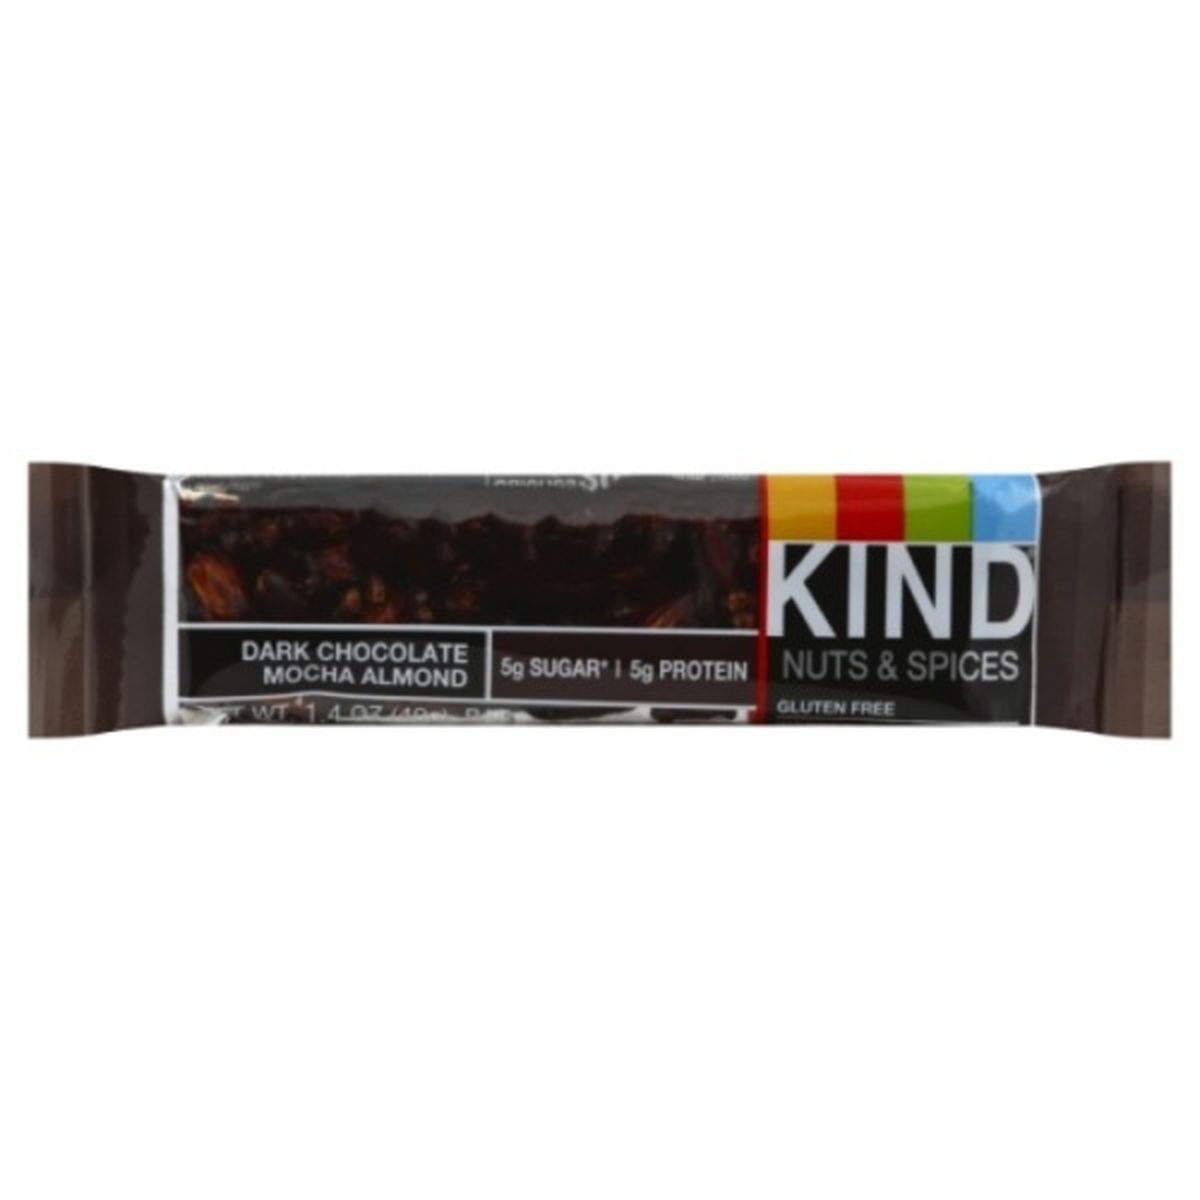 Calories in KIND Nuts & Spices Bar, Dark Chocolate Mocha Almond